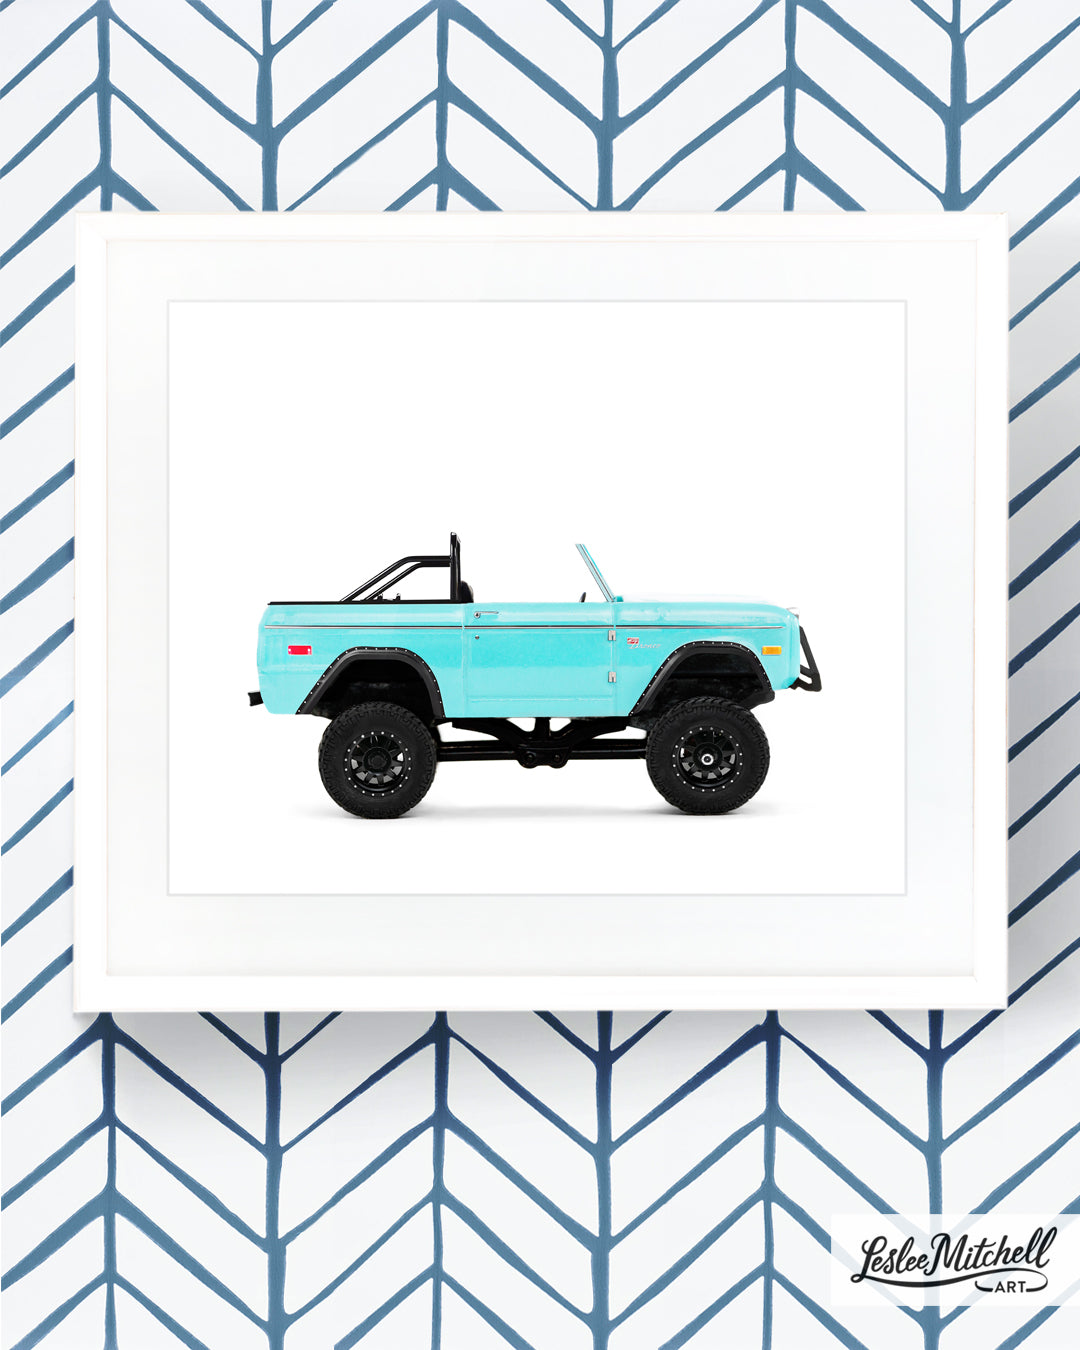 Car Series - Lifted Mint Bronco